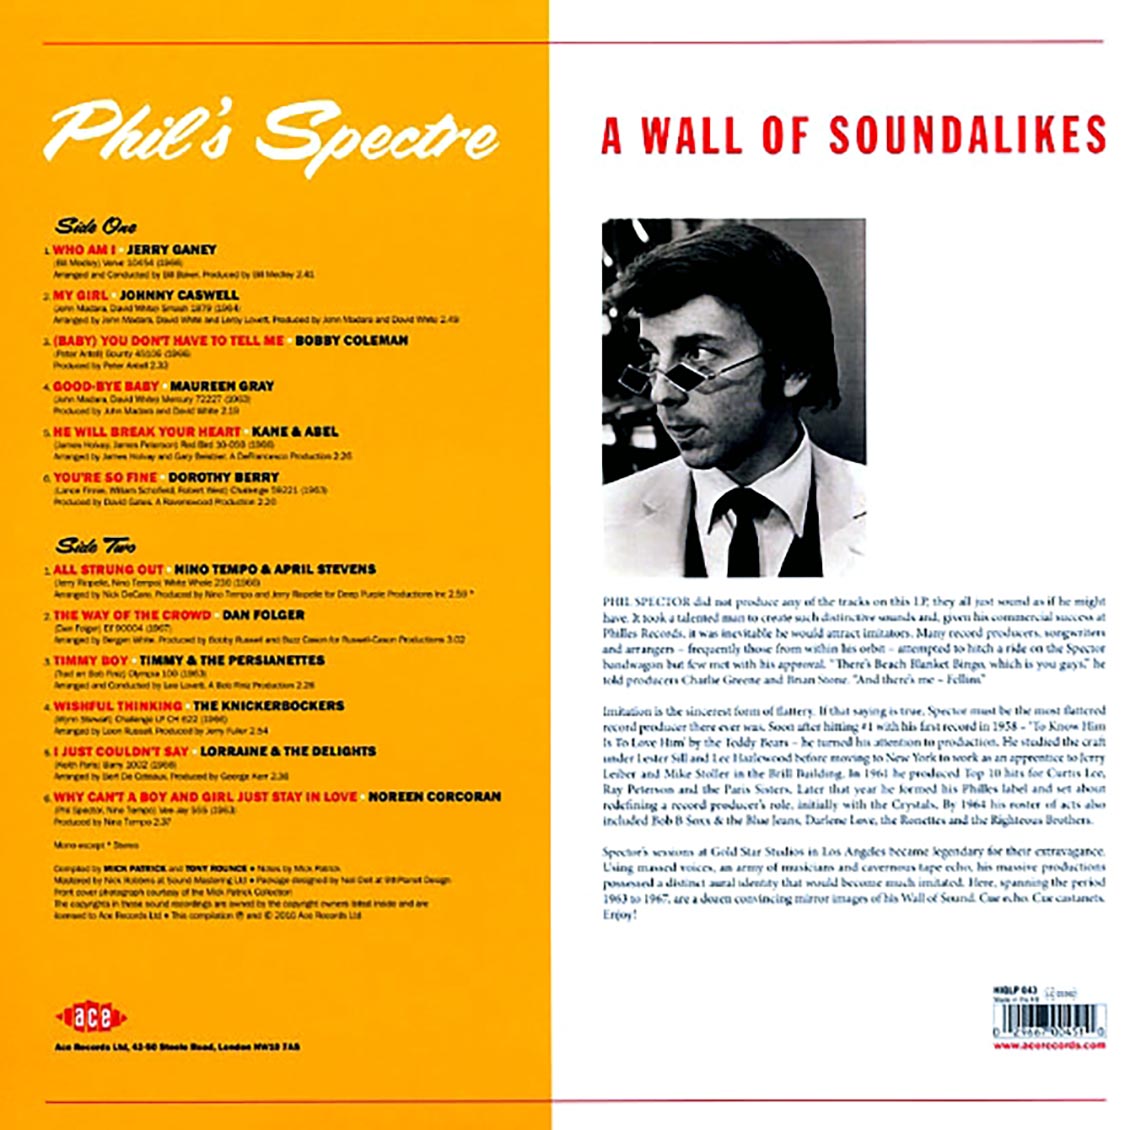 Jerry Ganey, The Knickerbockers, Johnny Caswell, Etc. - Phil's Spectre: A Wall Of Soundalikes (180g) (colored vinyl) - Vinyl LP, LP